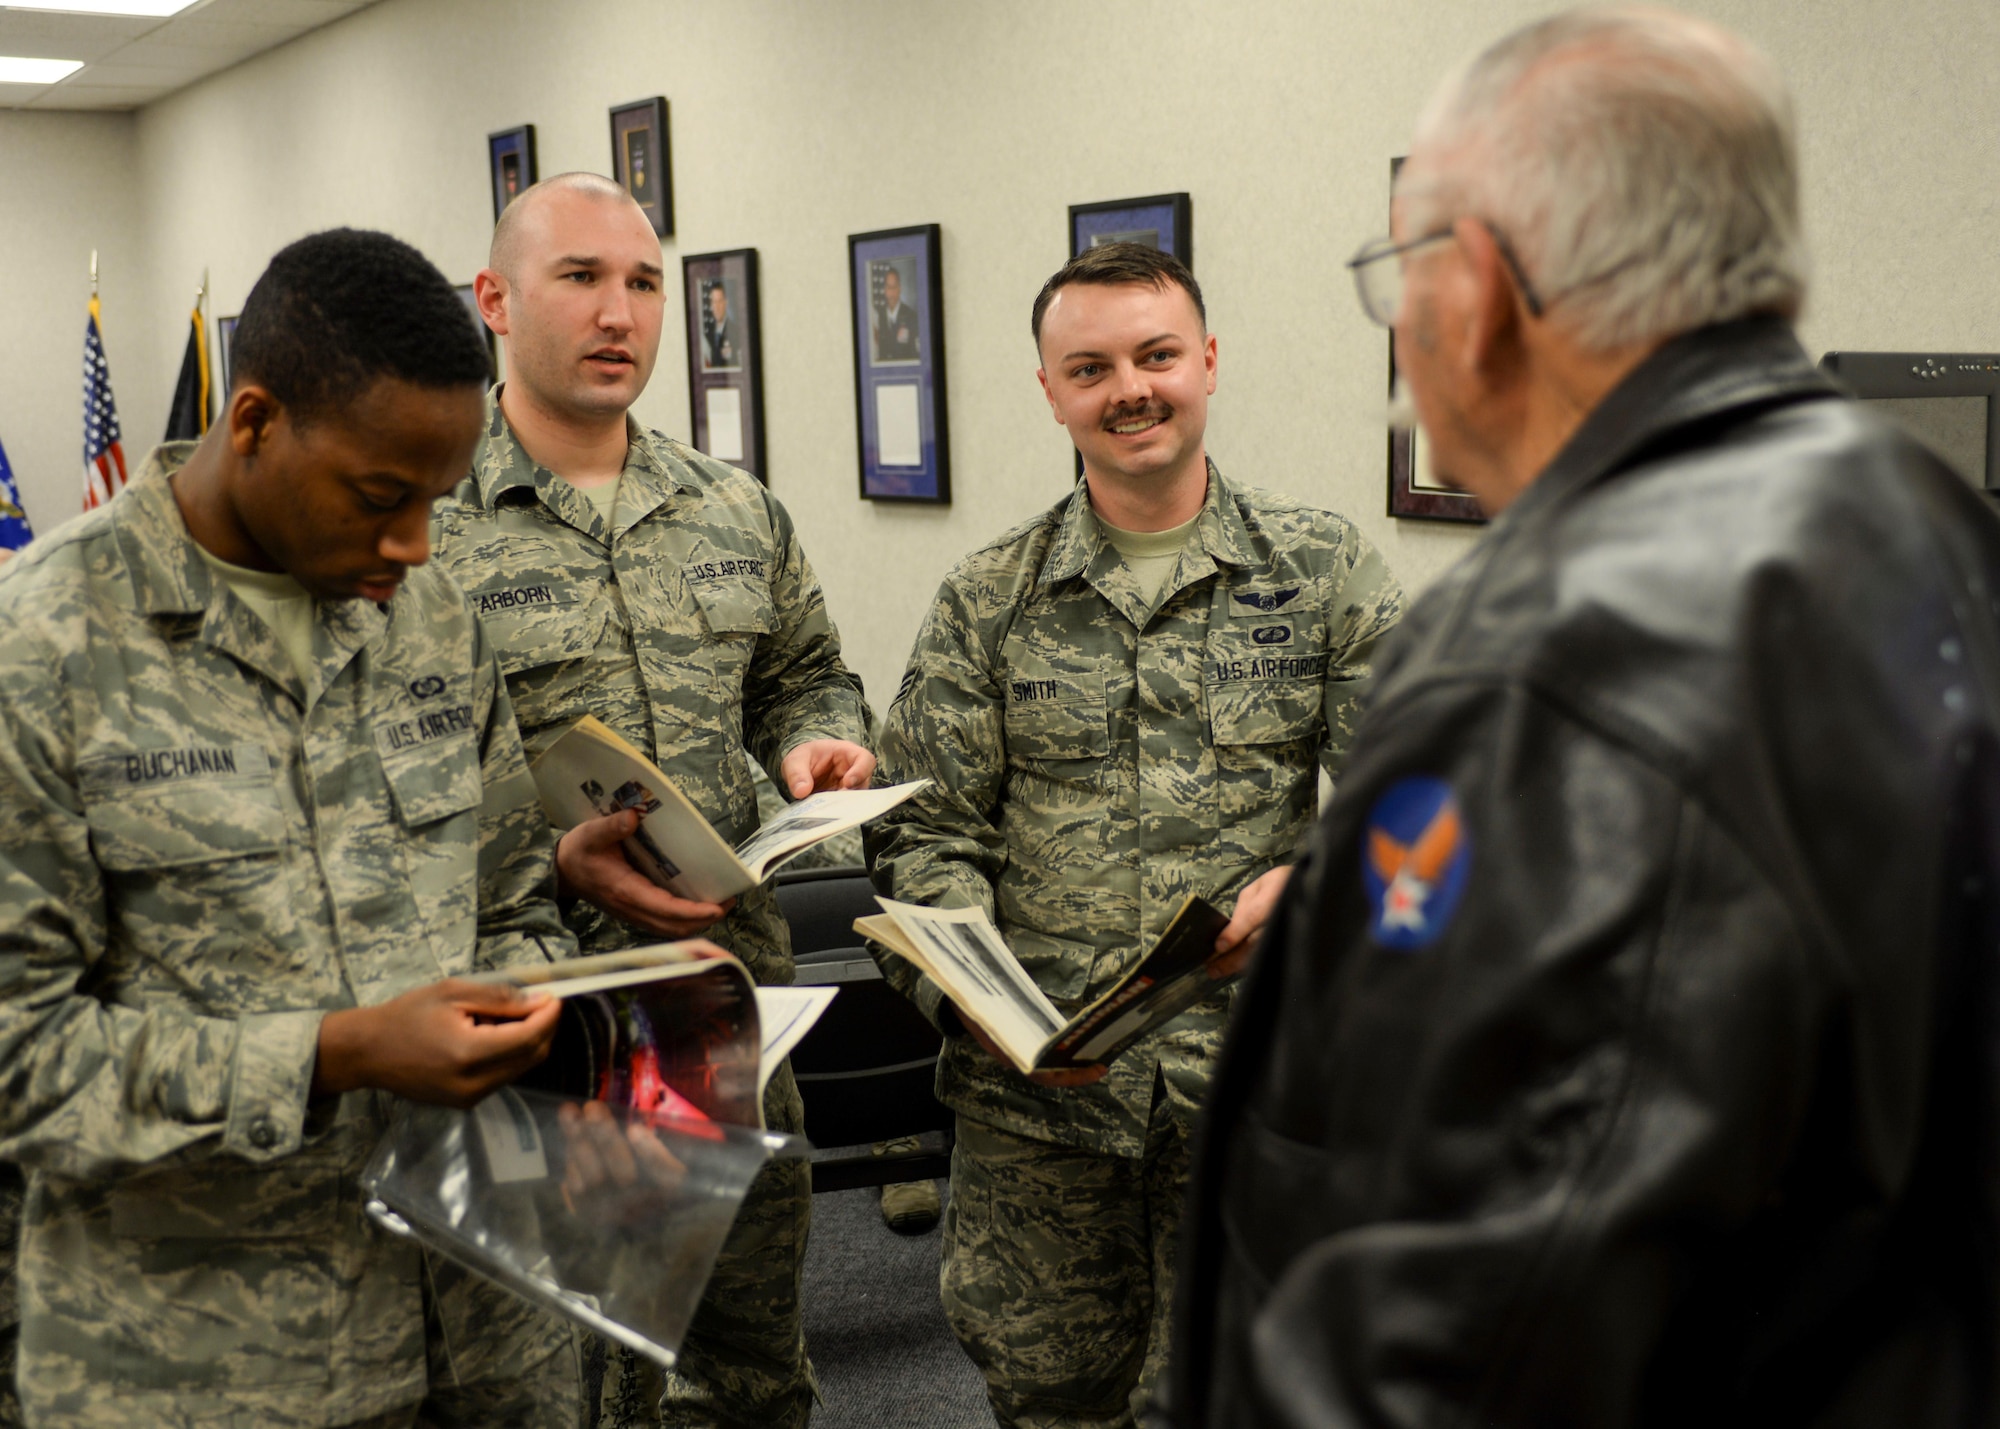 Airmen ask questions of Robert Schilling, a former Airman and gunner on the AC-47 “Spooky,” inside the Airman Leadership School at Ellsworth Air Force Base, S.D., March 20, 2017. Schilling was an Airman during the Vietnam War, and now tells his stories to help enlighten the next generation of Air Force leaders. (U.S. Air Force photo by Airman 1st Class Randahl J. Jenson)   